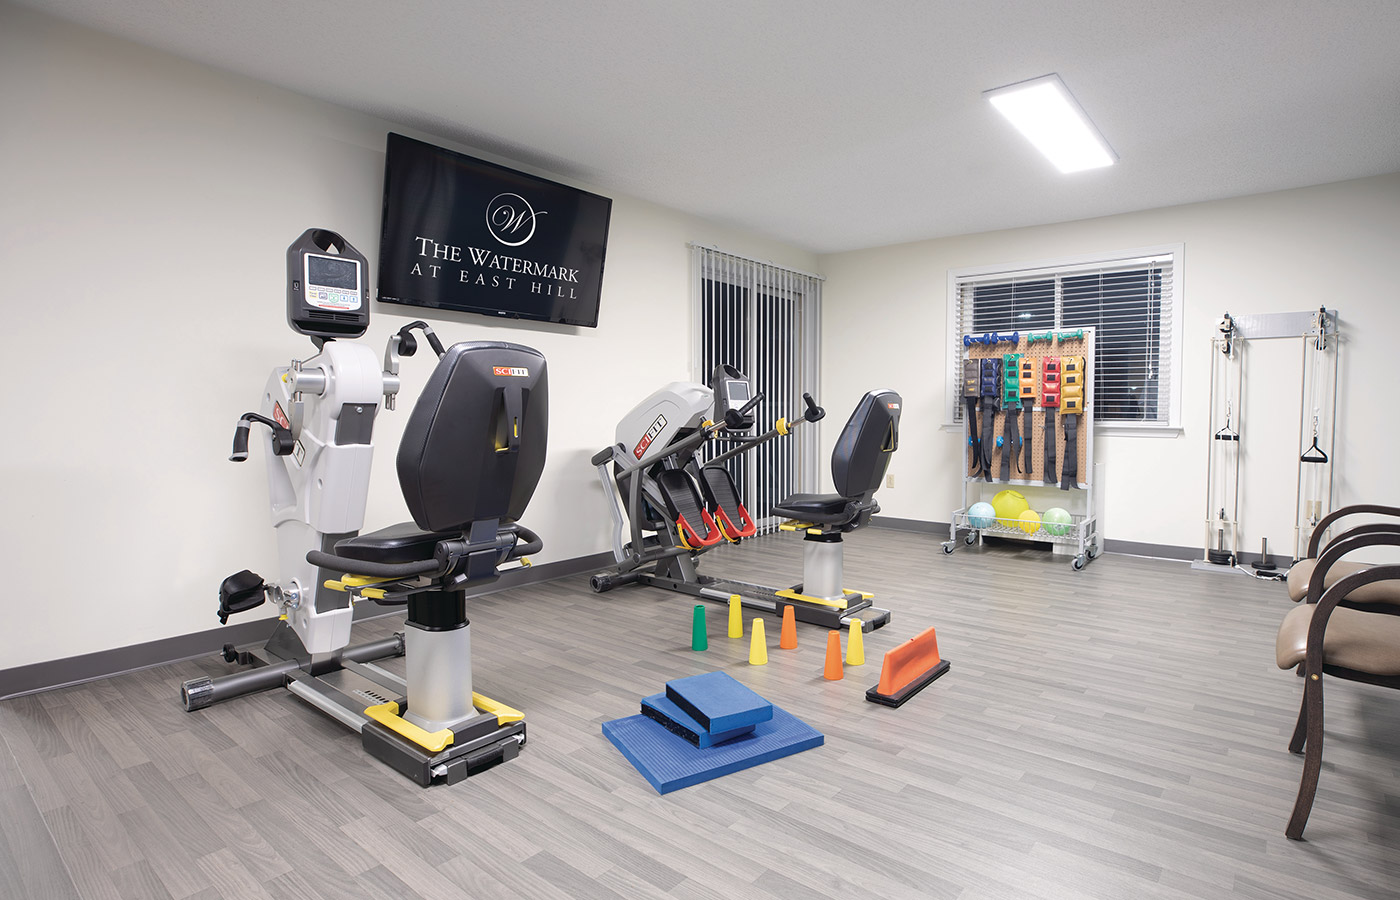 The fitness room at The Watermark at East Hill.